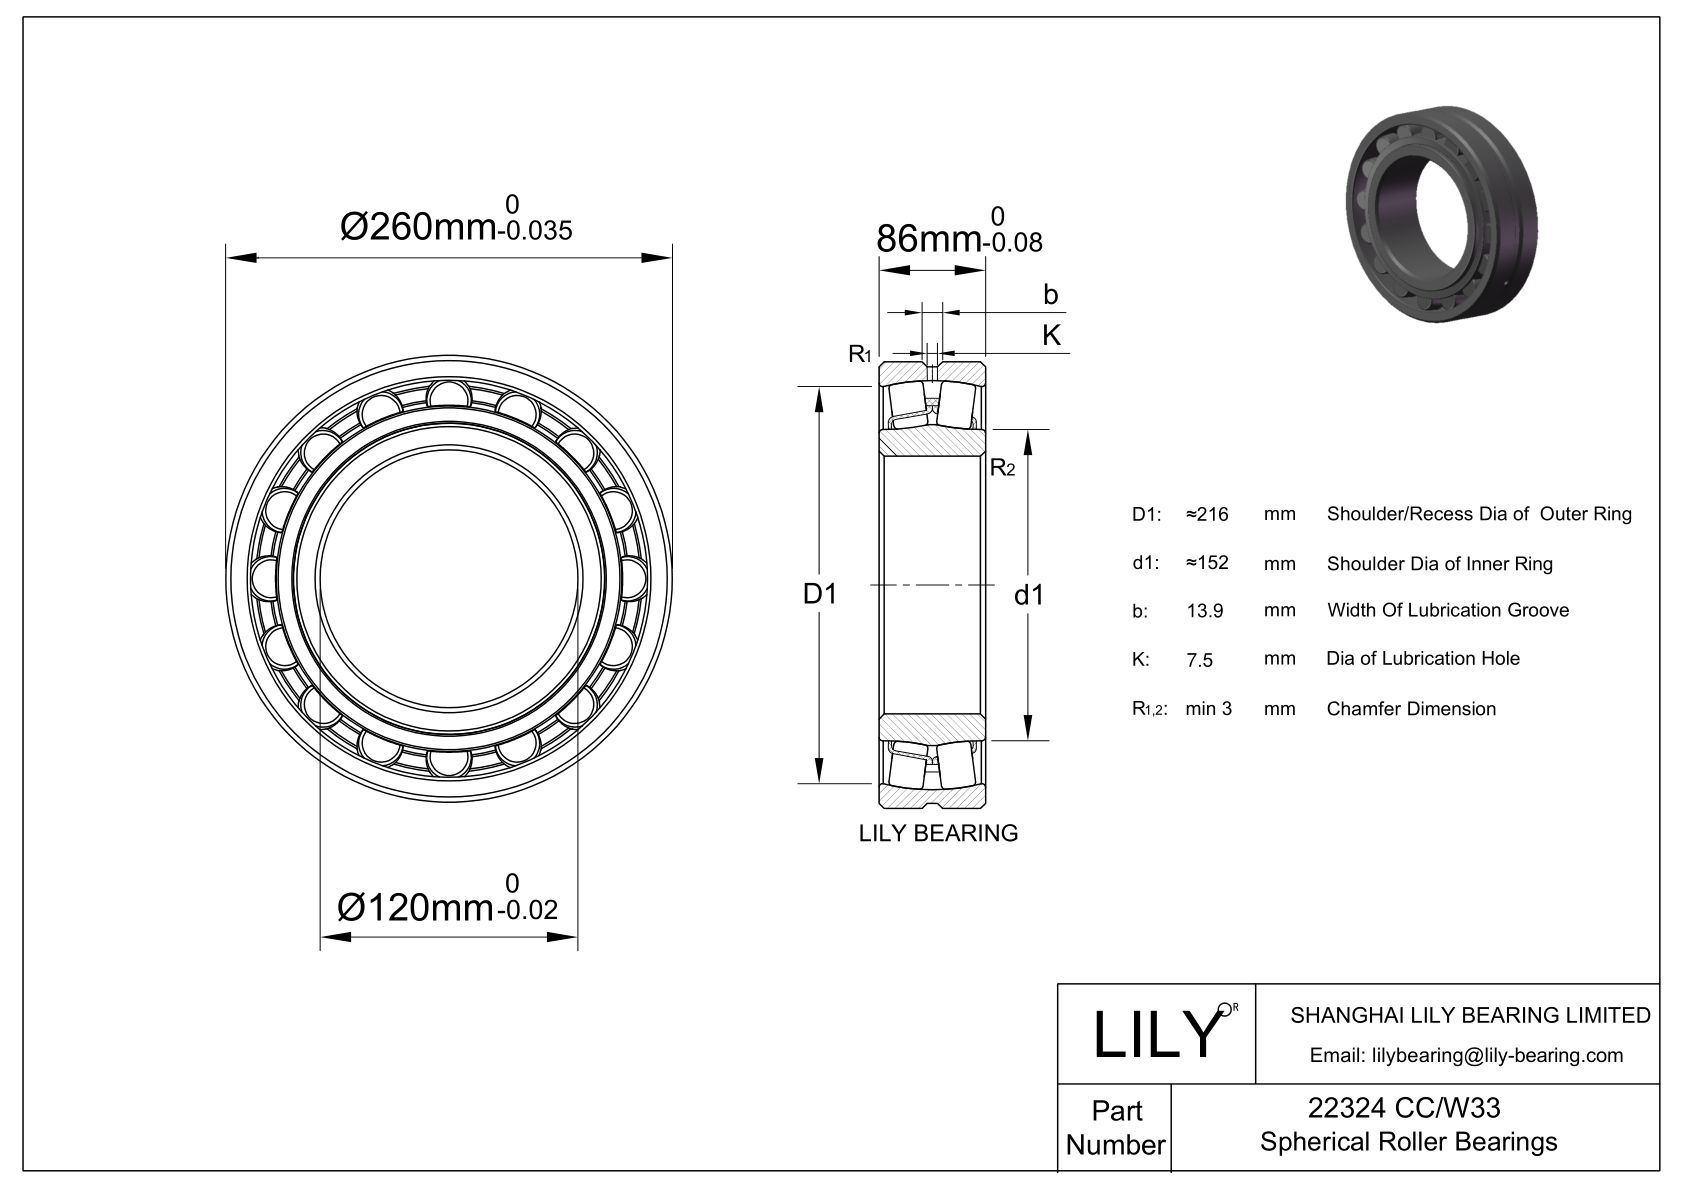 22324 CC/W33 Double Row Spherical Roller Bearing cad drawing